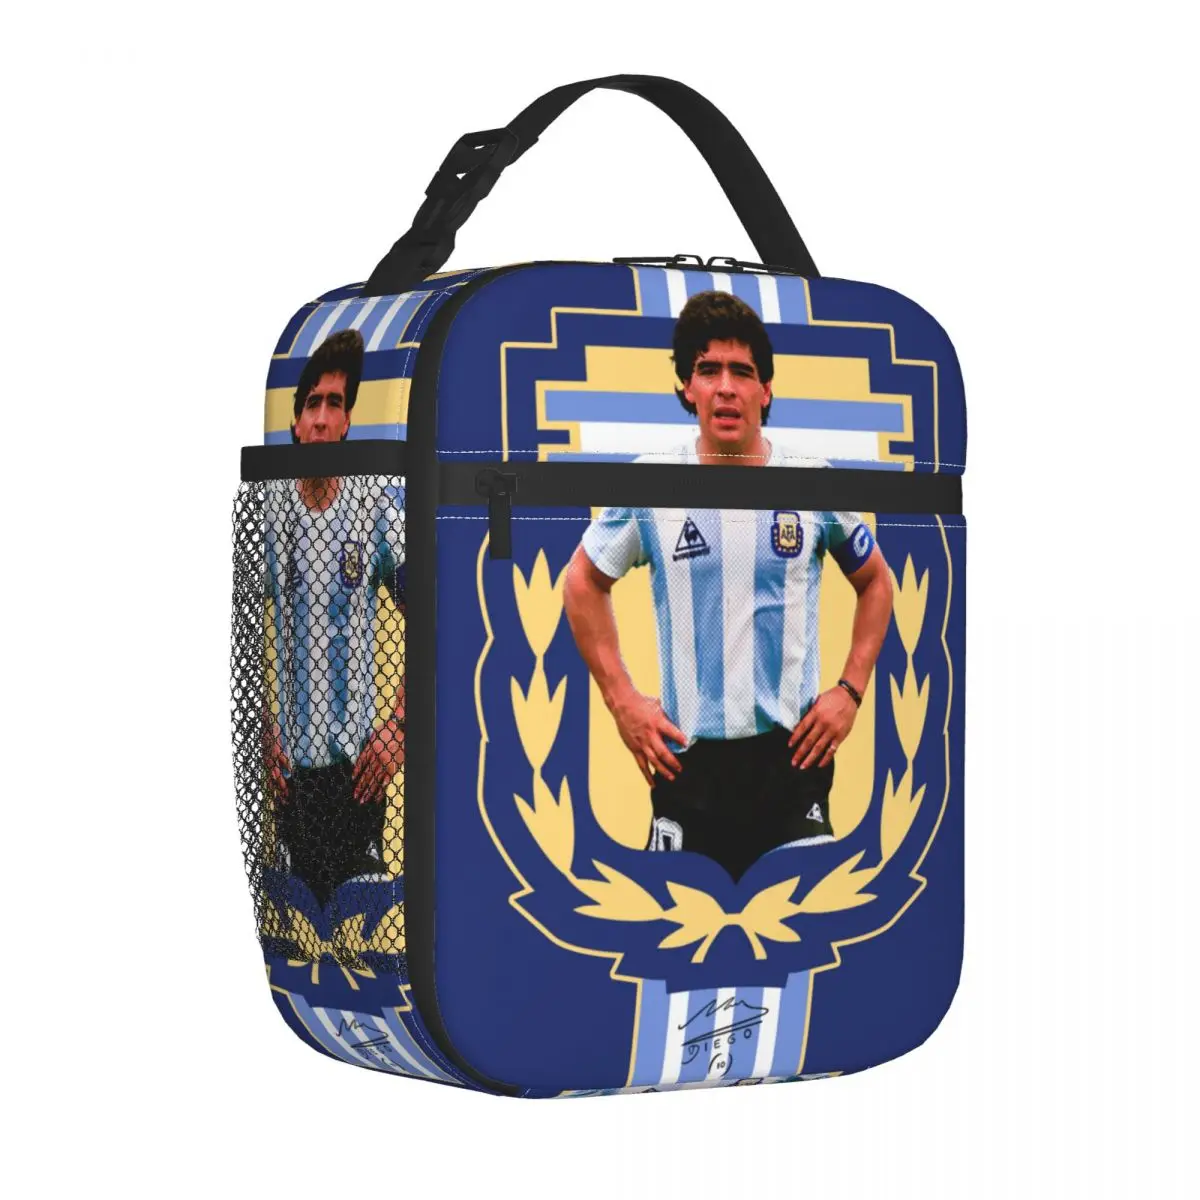 

Legend Maradona Insulated Lunch Bag Cooler Bag Meal Container Diego Armando Football Soccer Tote Lunch Box Men Work Outdoor